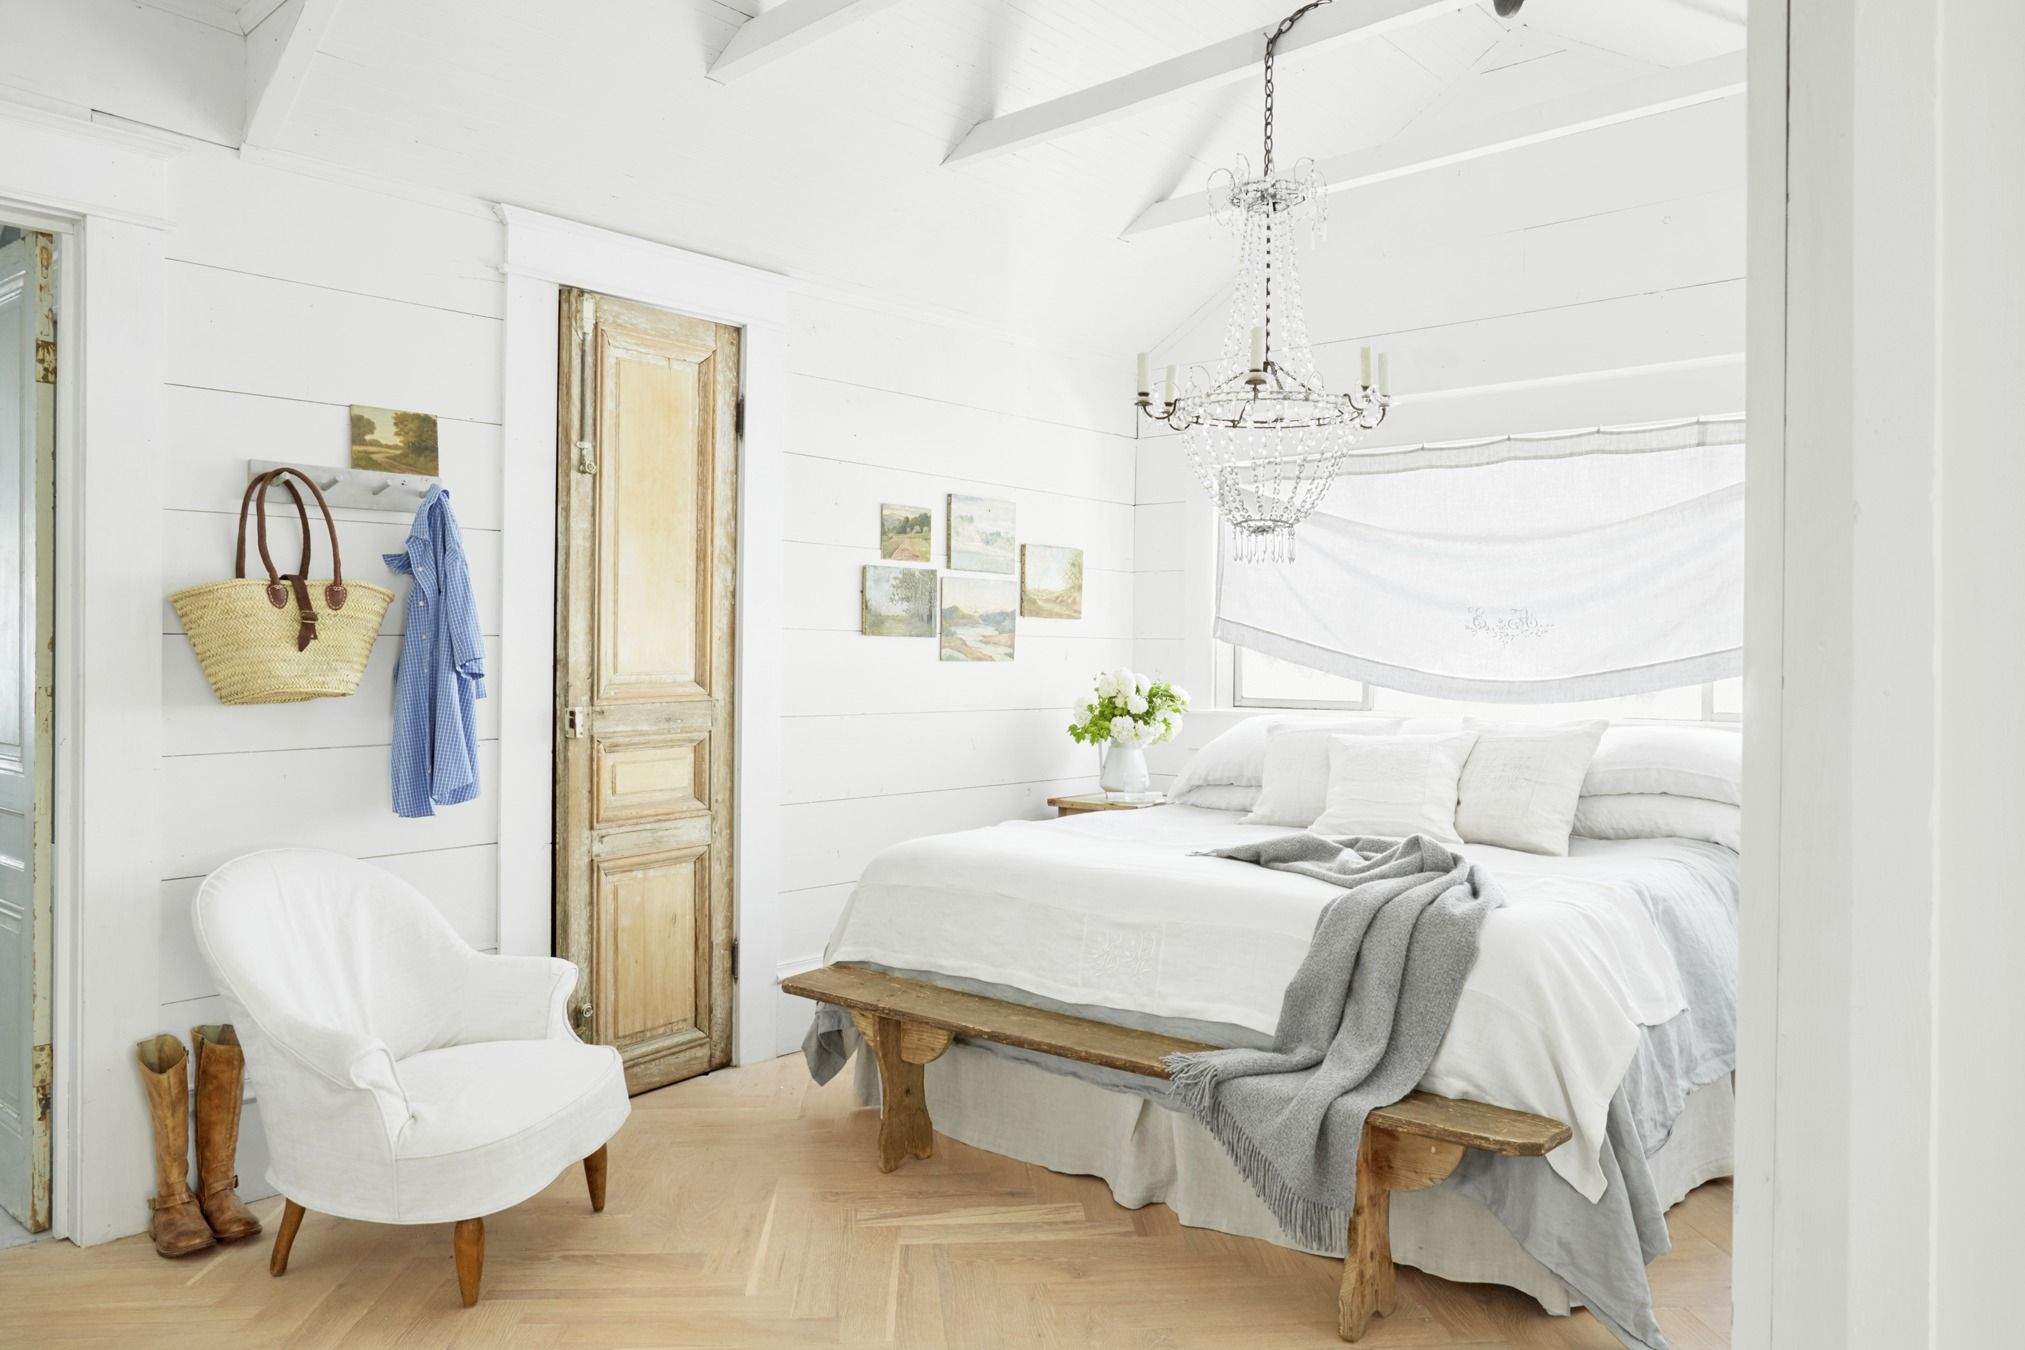 5 Bedding Style Tips To Sell Your House